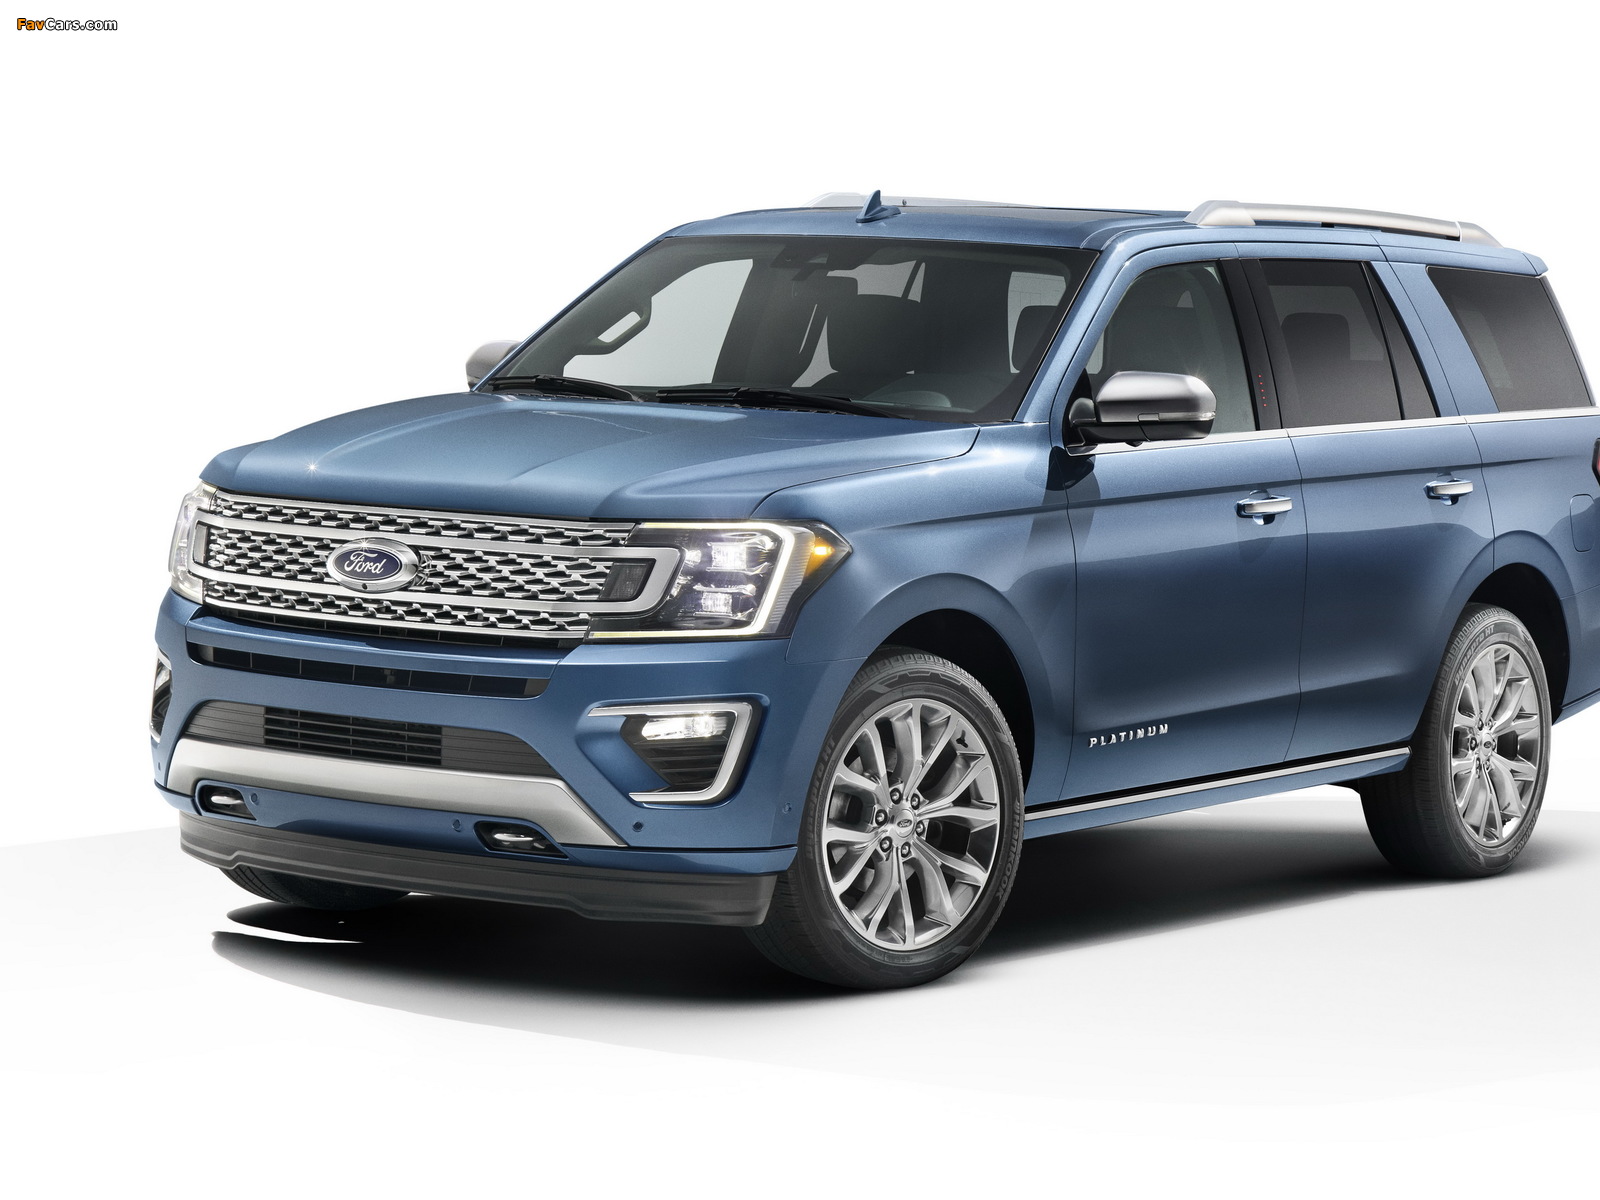 Ford Expedition Platinum 2017 pictures (1600 x 1200)